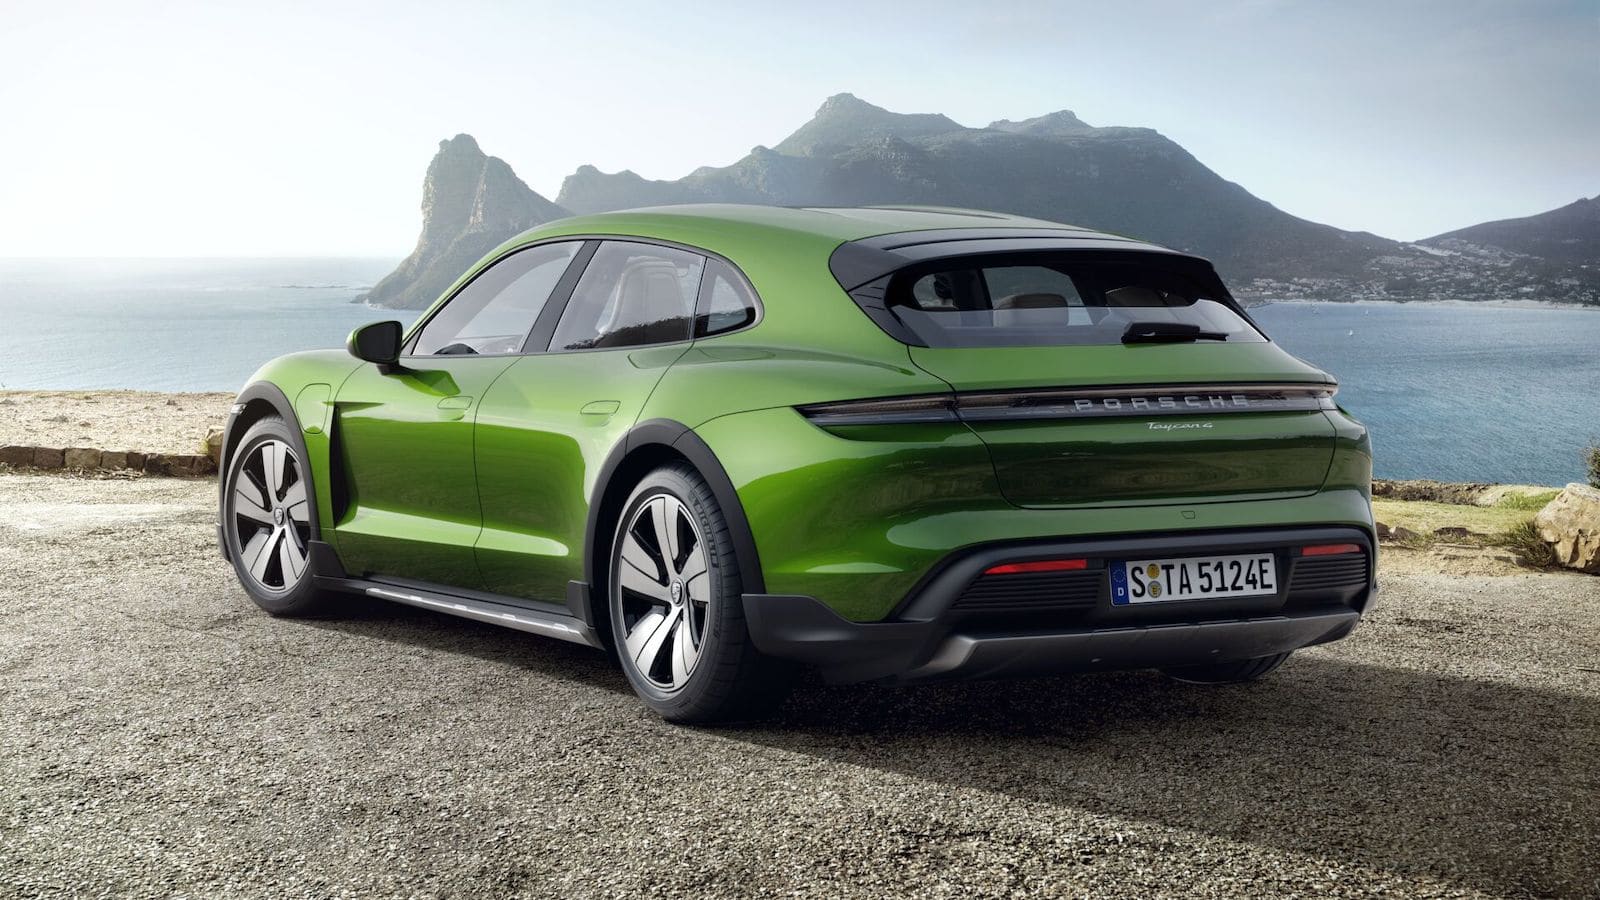 The Porsche Taycan Cross Turismo is wonderfully colorful. Here's what we'd  choose - Autoblog